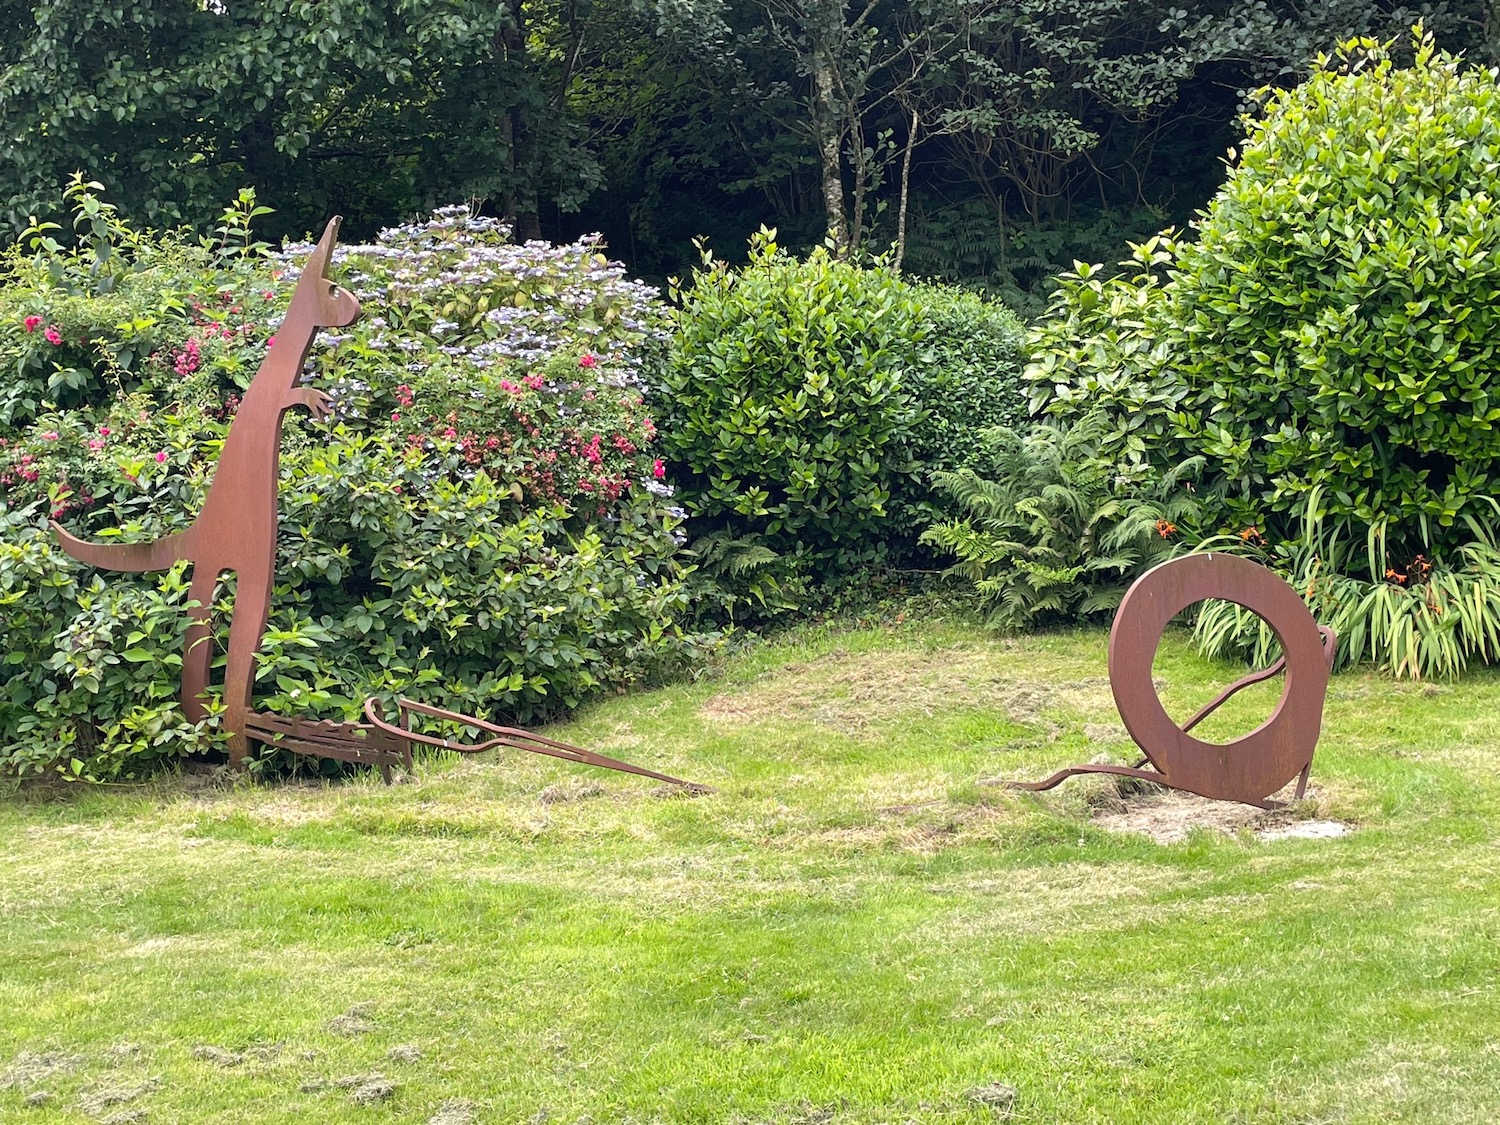 Chasing the Visual Element – sculpture in metal (rusted surface) in a garden setting; to the left is the profile of a cartoonish kangaroo, to the right a circular shape in metal which the kangaroo may be pursuing